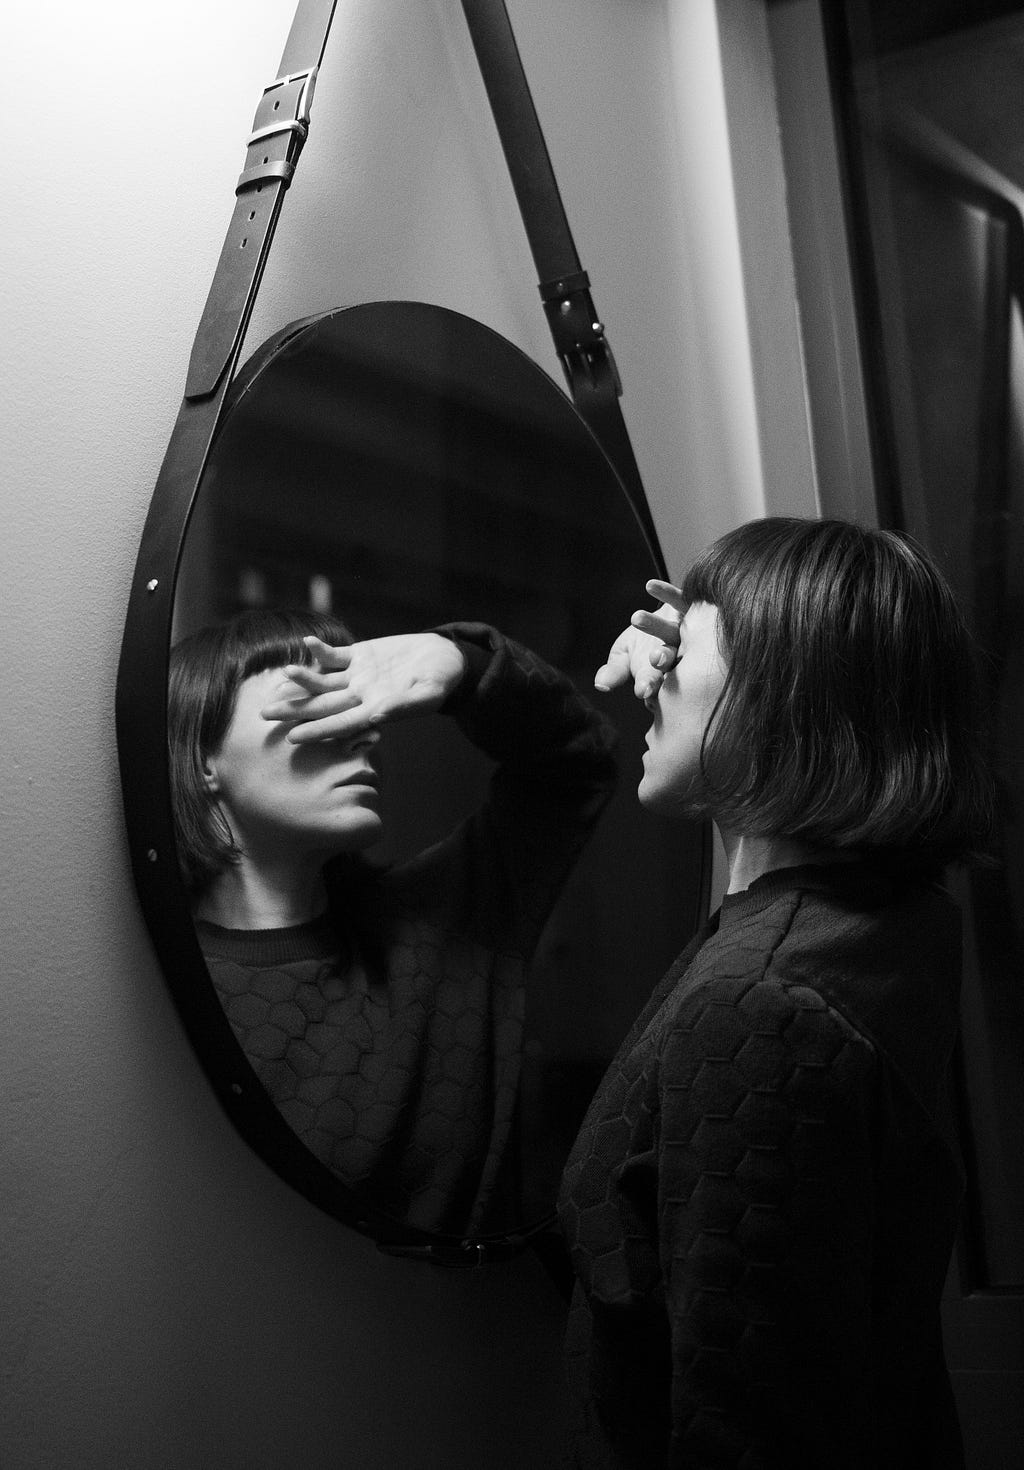 A black & white image of a lady looking into a round hanging mirror covering her eyes to stop her from seeing her reflection